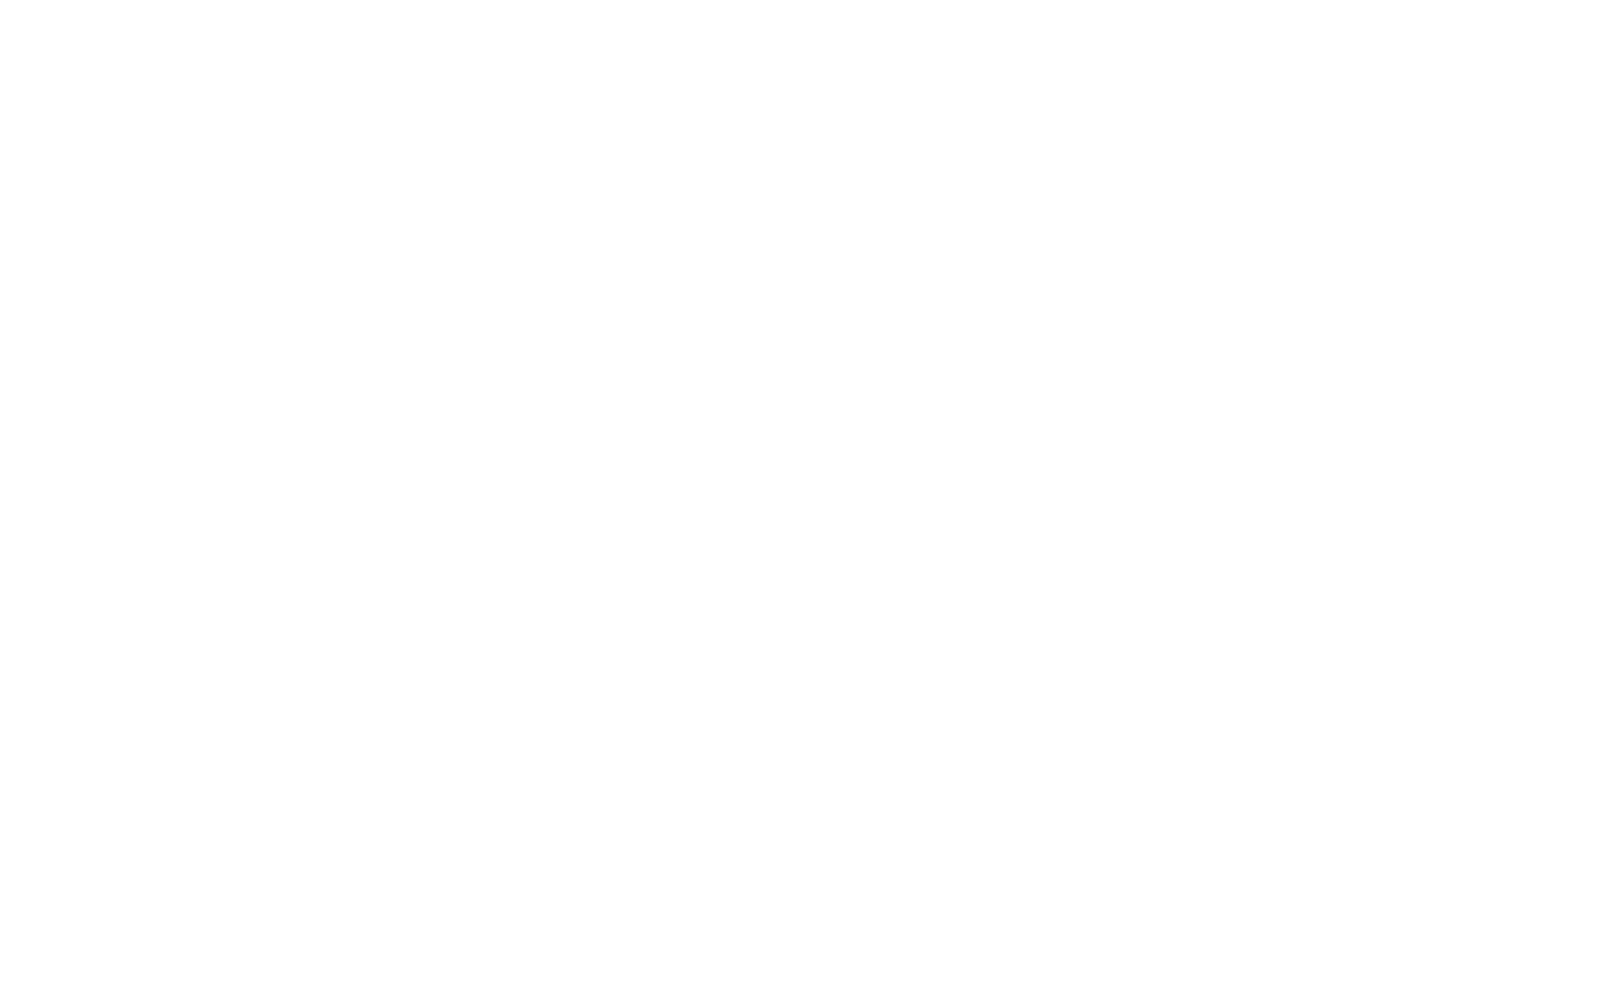 Boyes Group Realty Inc.